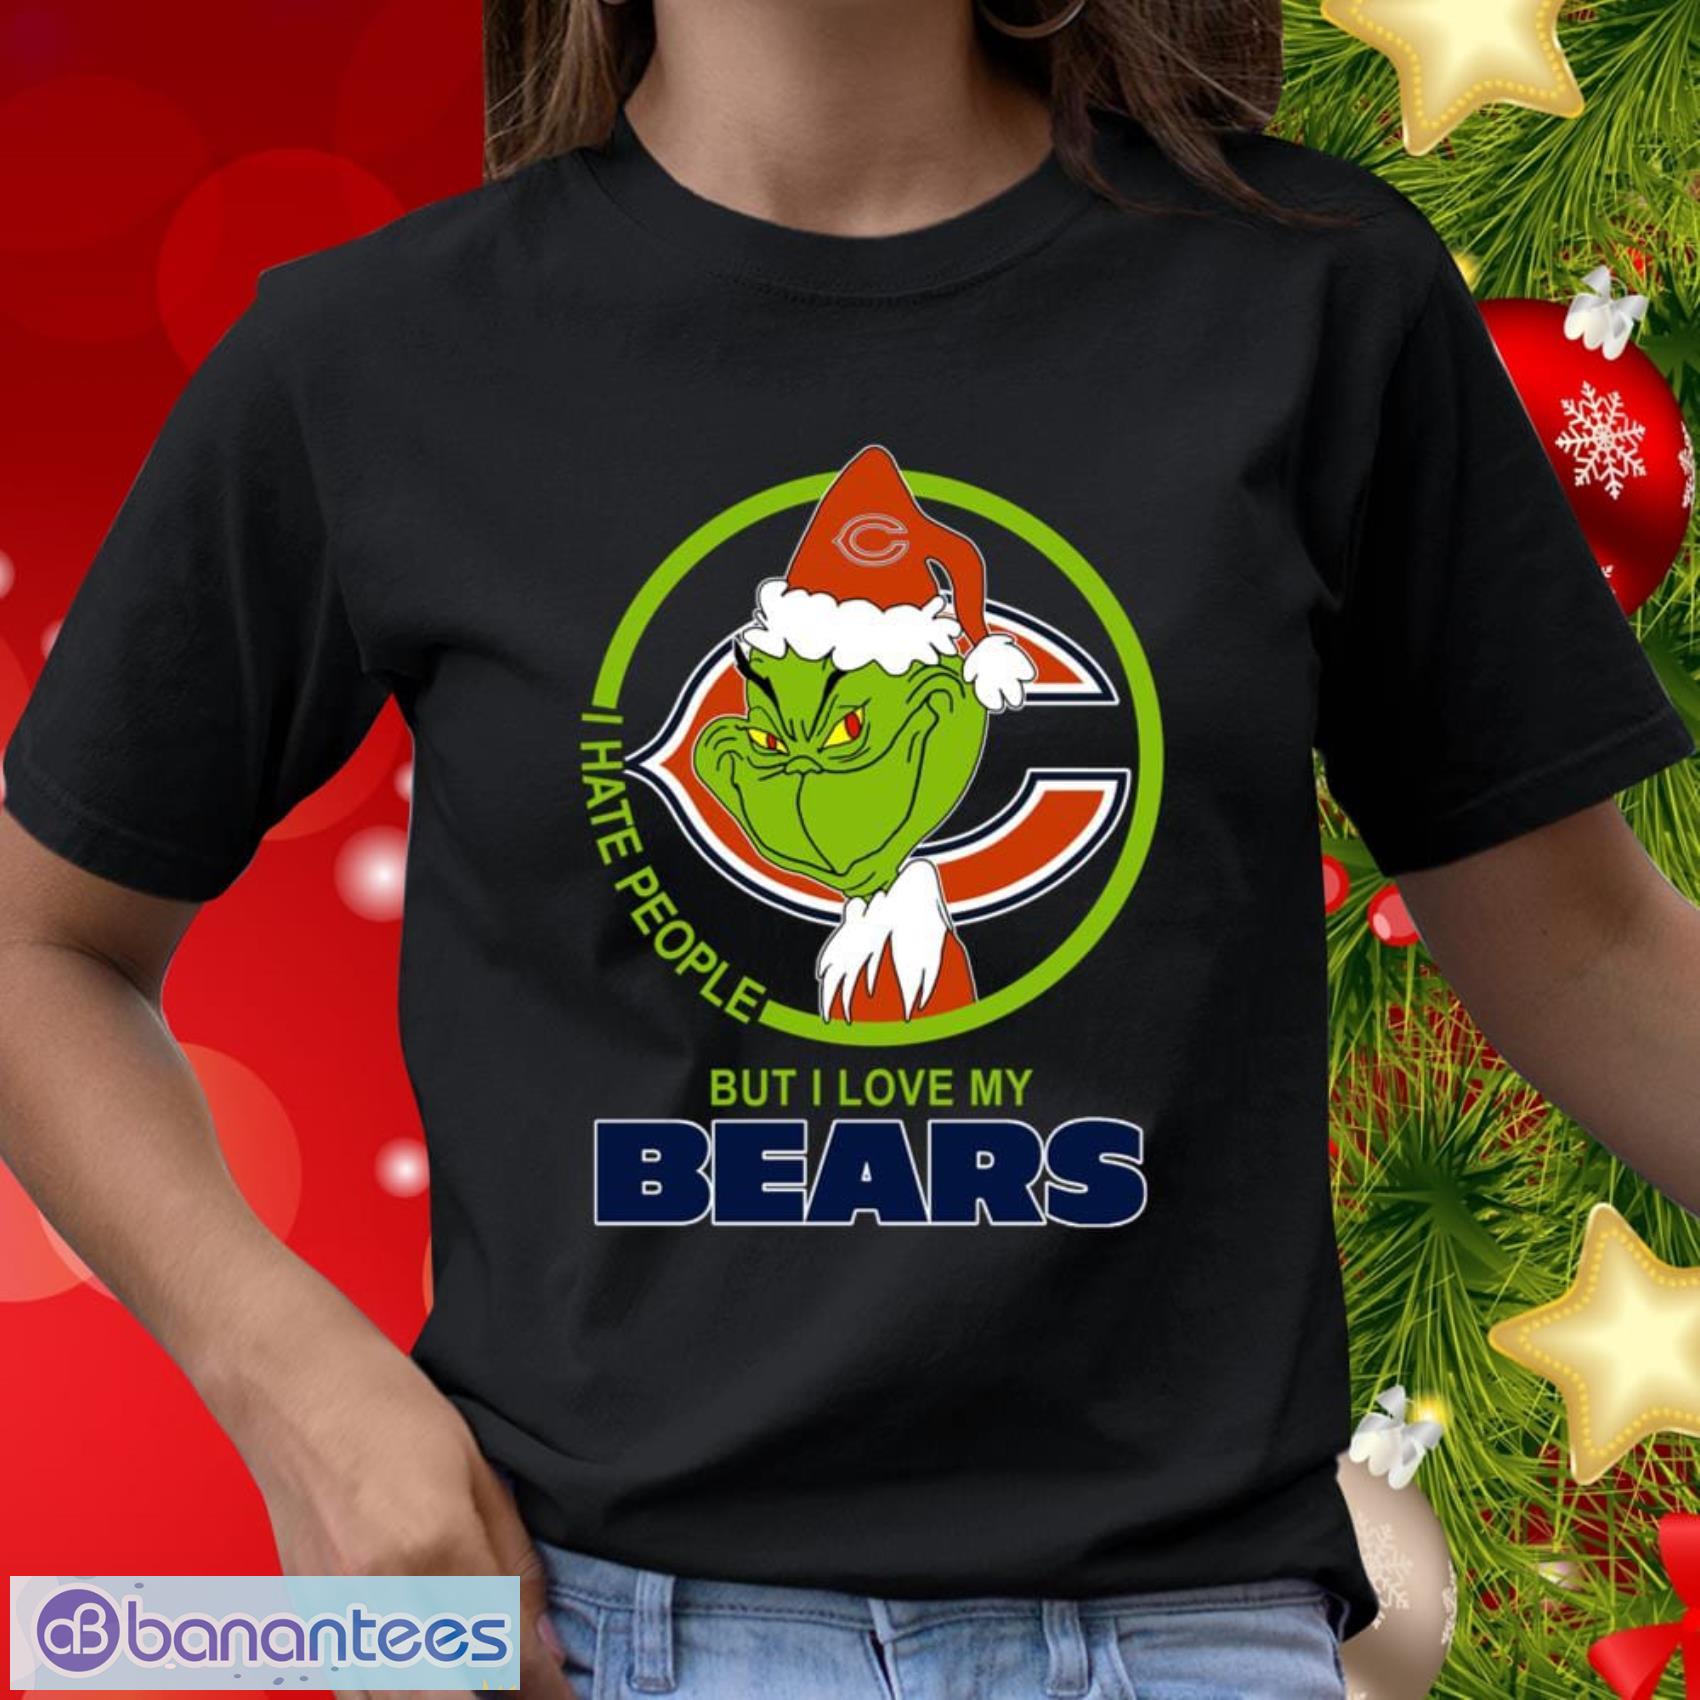 Chicago Bears NFL Christmas Grinch I Hate People But I Love My Favorite Football Team T Shirt - Chicago Bears NFL Christmas Grinch I Hate People But I Love My Favorite Football Team T Shirt_2